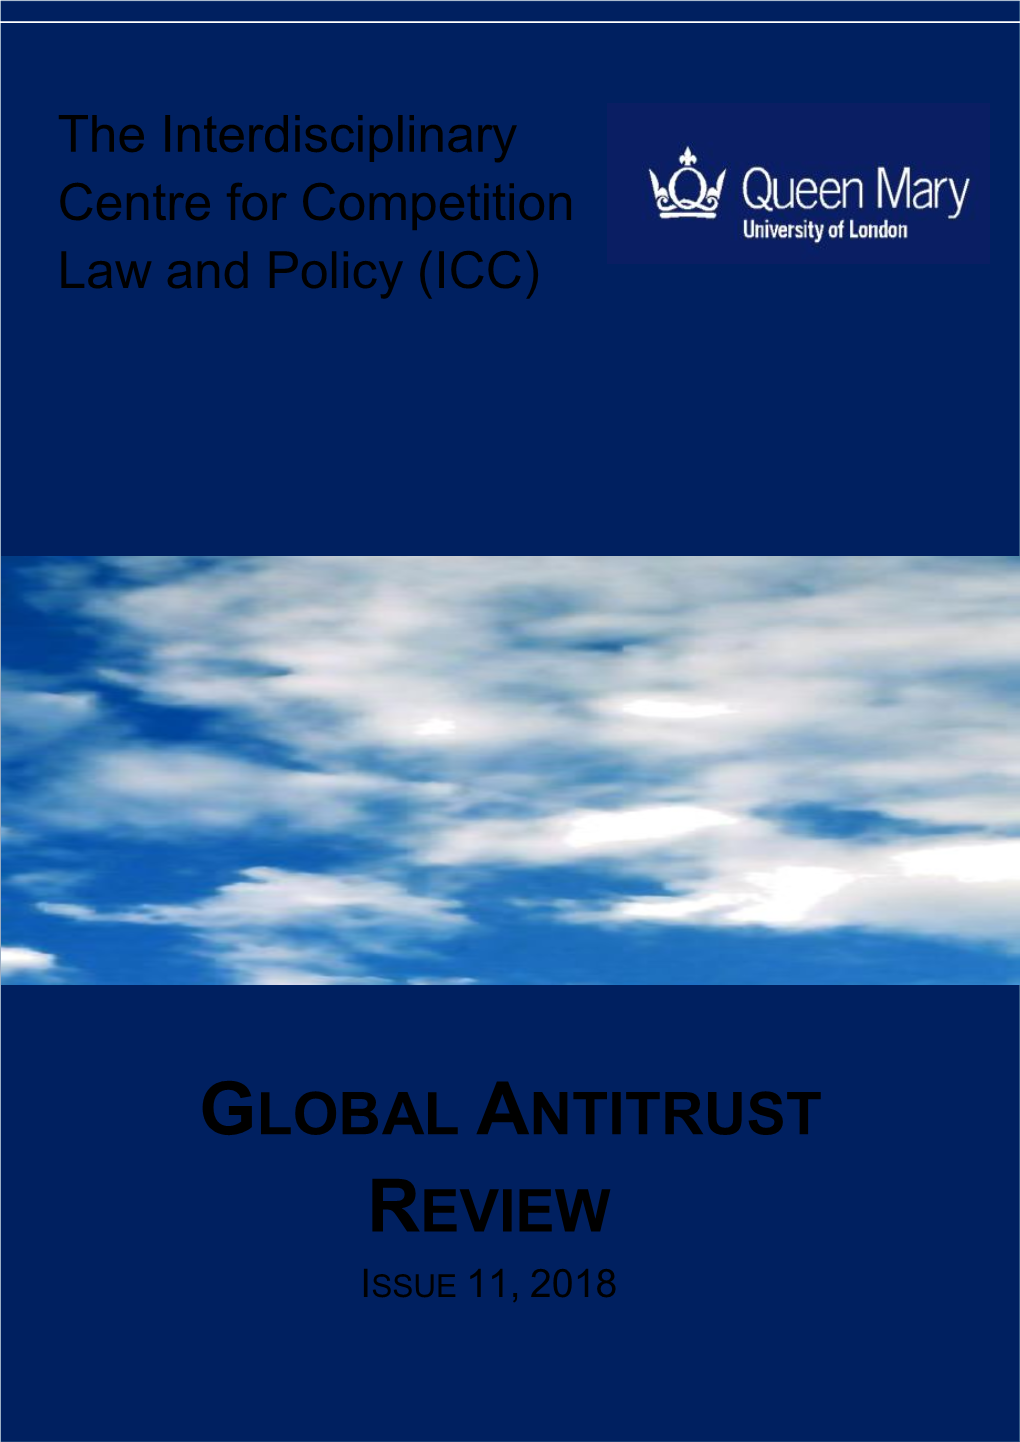 Global Antitrust Review Issue 11, 2018